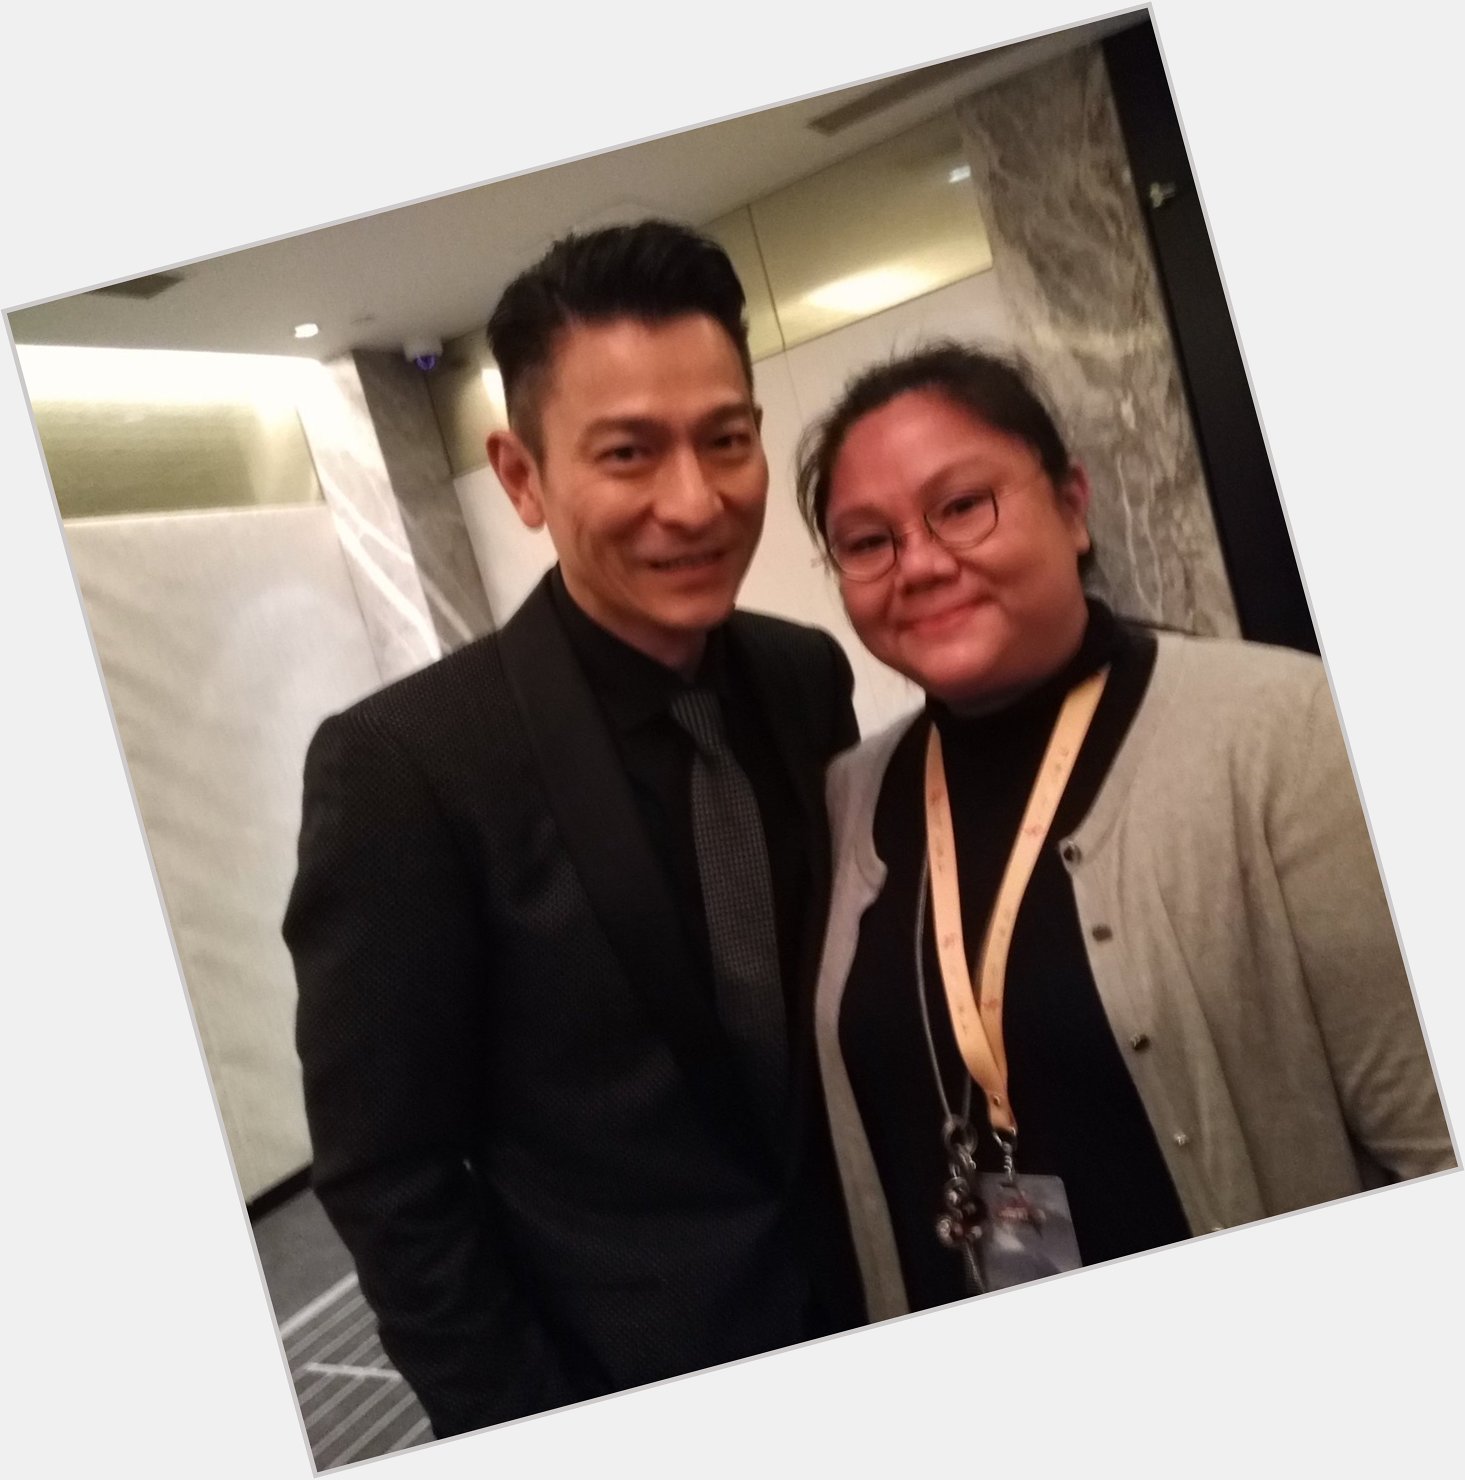 Happy birthday Andy Lau. Thank you for being kind and professional during our interview  